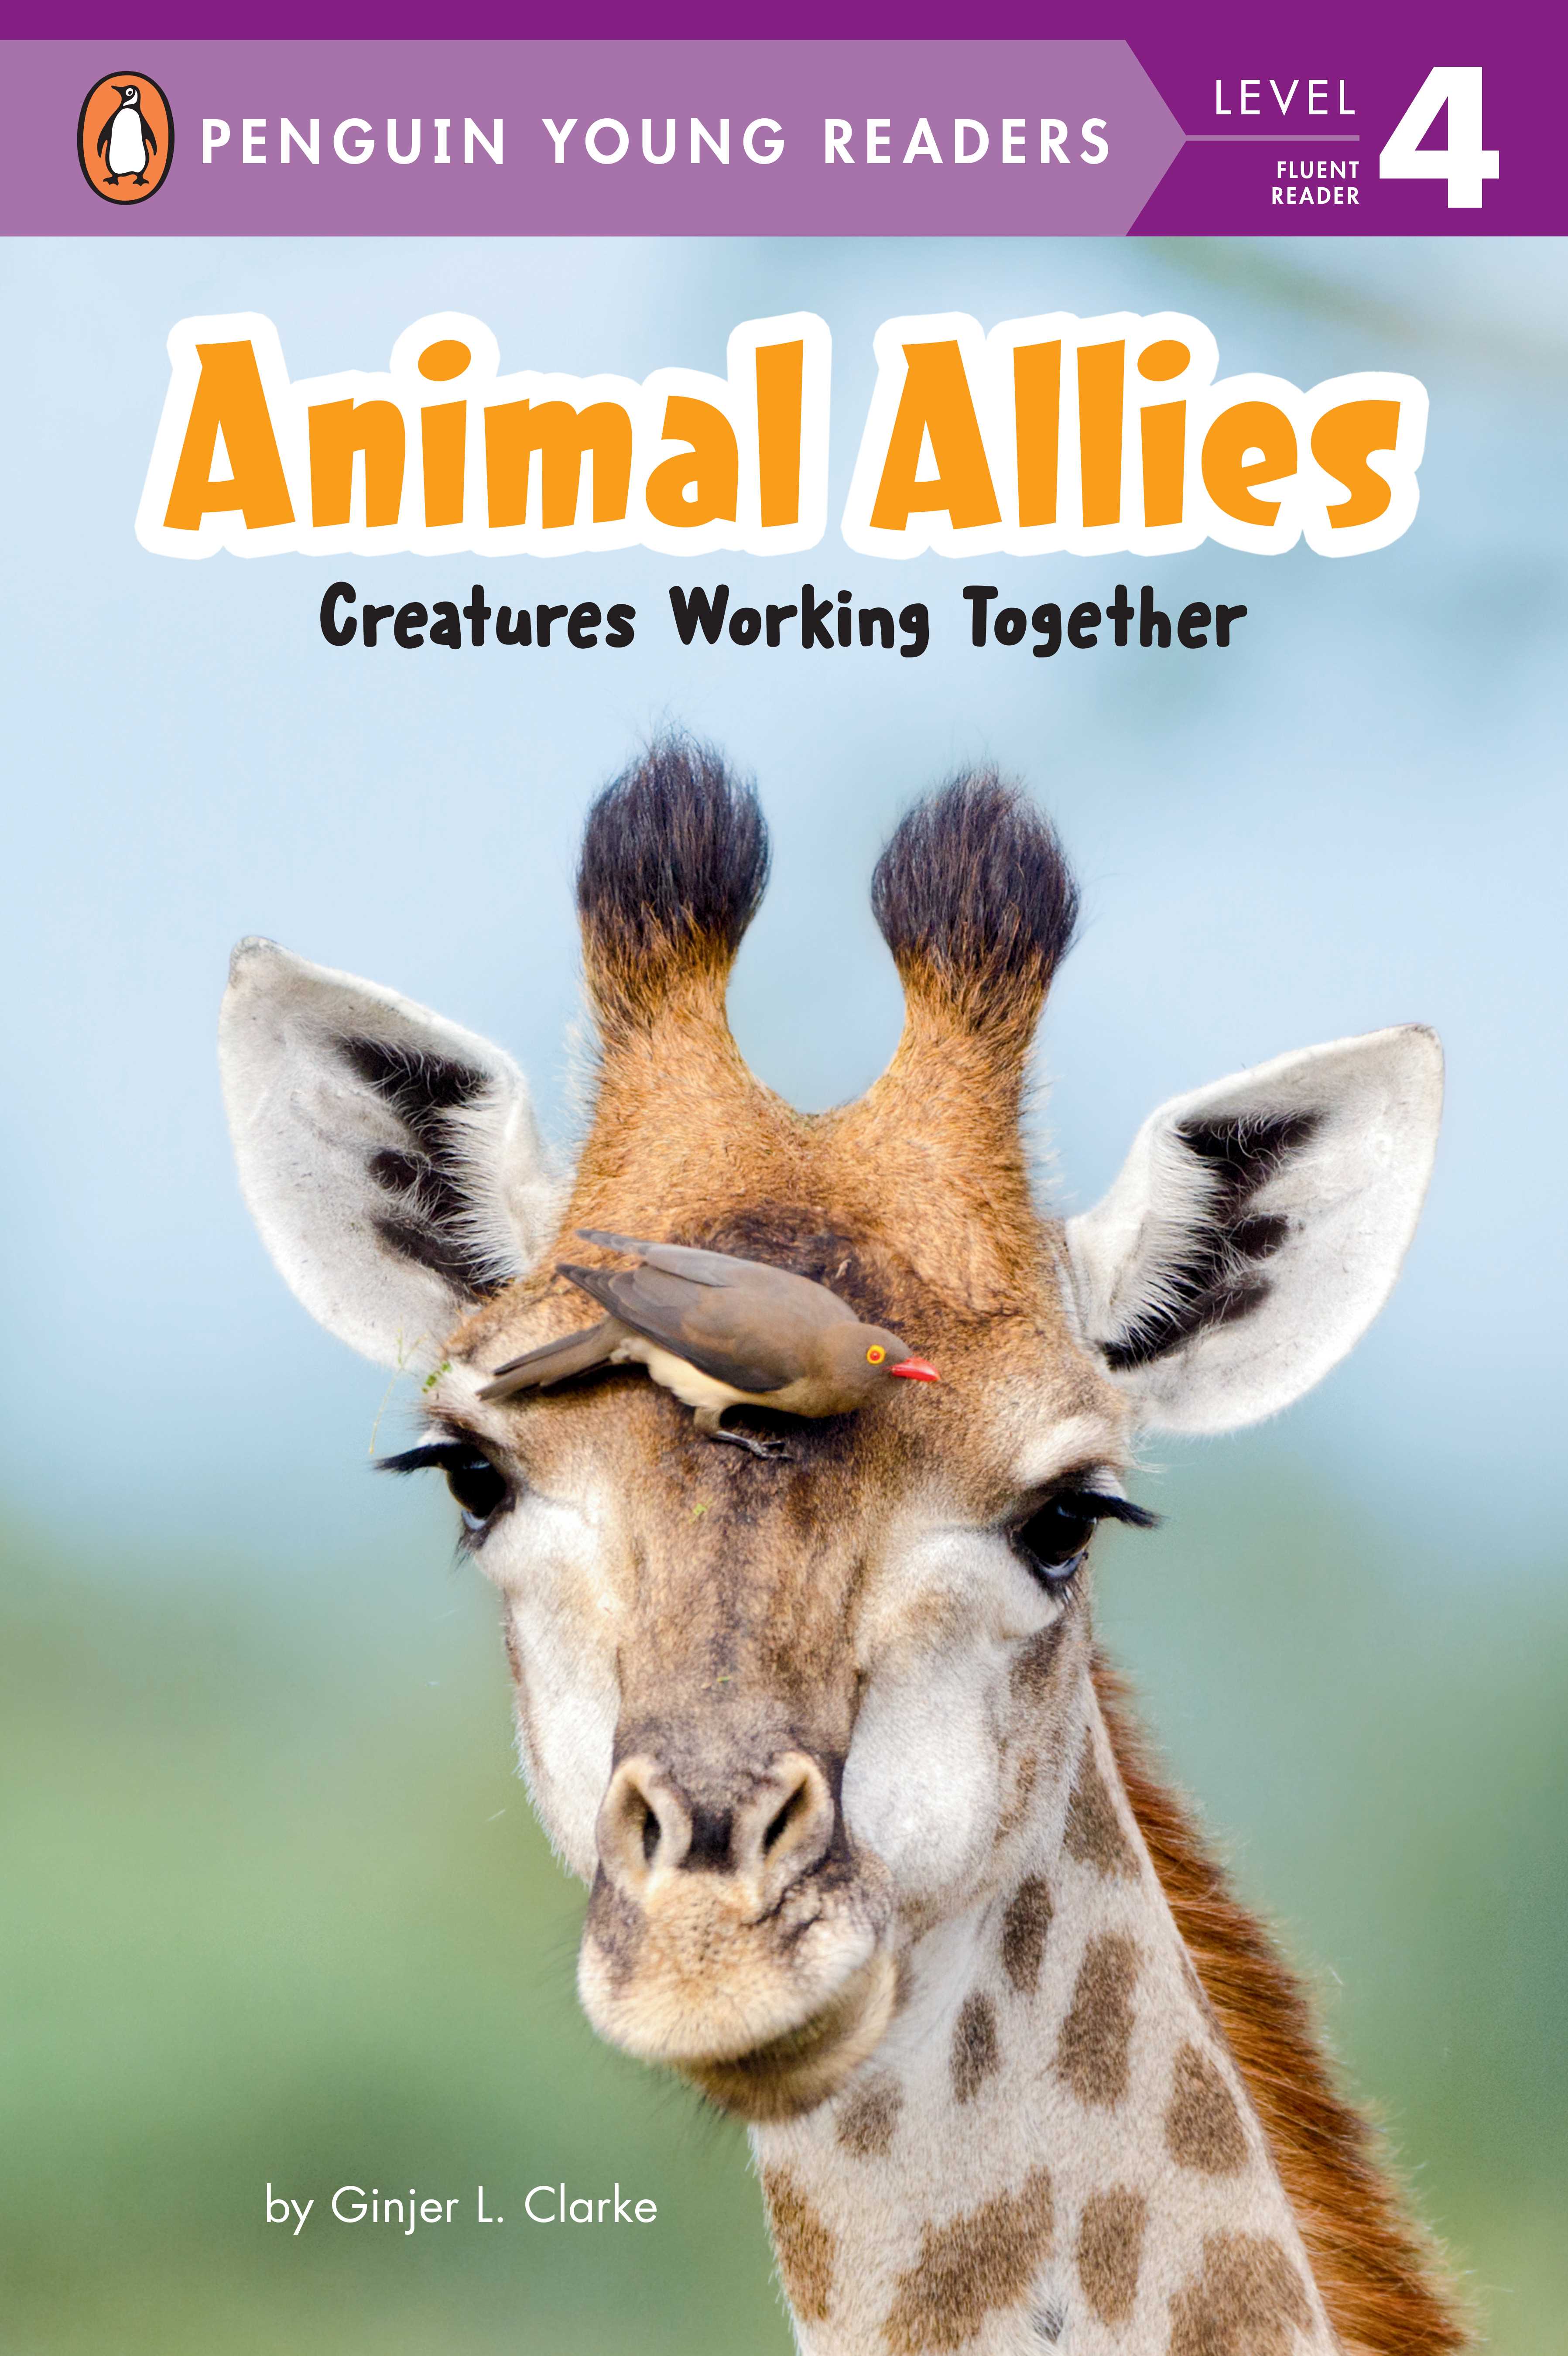 Animal Allies (Penguin Young Readers Level 4)